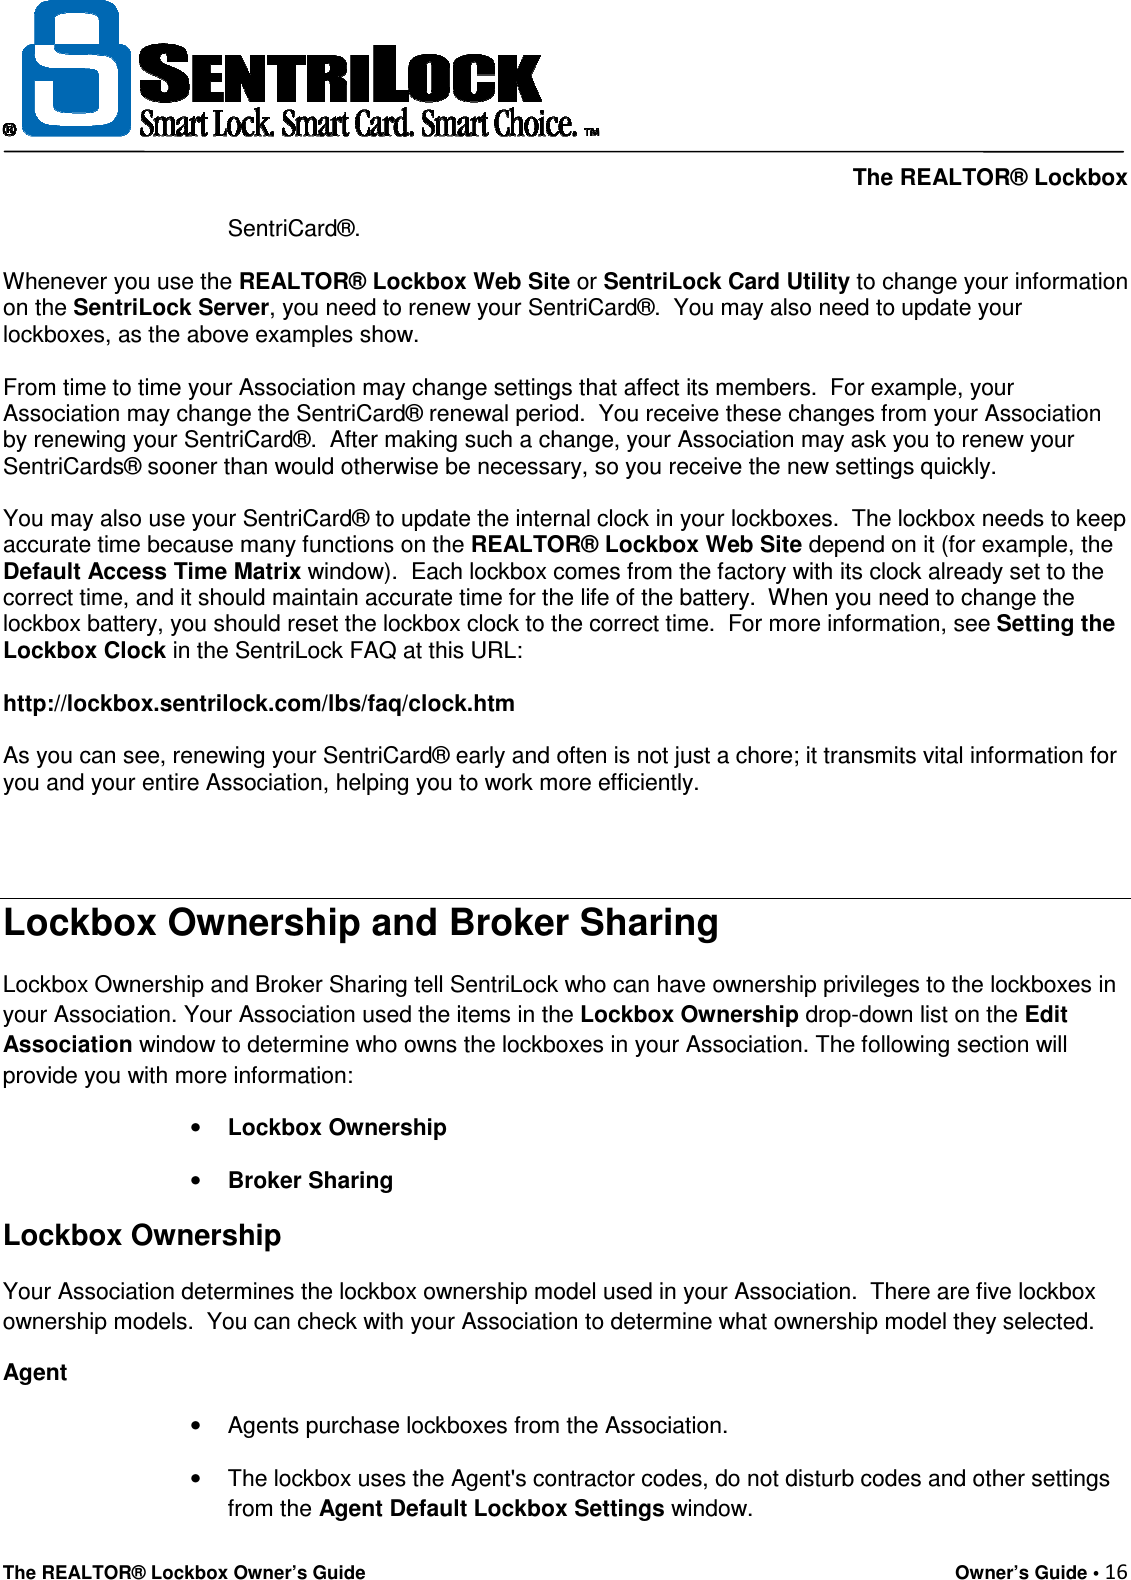     The REALTOR® Lockbox The REALTOR® Lockbox Owner’s Guide    Owner’s Guide • 16  SentriCard®.  Whenever you use the REALTOR® Lockbox Web Site or SentriLock Card Utility to change your information on the SentriLock Server, you need to renew your SentriCard®.  You may also need to update your lockboxes, as the above examples show.  From time to time your Association may change settings that affect its members.  For example, your Association may change the SentriCard® renewal period.  You receive these changes from your Association by renewing your SentriCard®.  After making such a change, your Association may ask you to renew your SentriCards® sooner than would otherwise be necessary, so you receive the new settings quickly.    You may also use your SentriCard® to update the internal clock in your lockboxes.  The lockbox needs to keep accurate time because many functions on the REALTOR® Lockbox Web Site depend on it (for example, the Default Access Time Matrix window).  Each lockbox comes from the factory with its clock already set to the correct time, and it should maintain accurate time for the life of the battery.  When you need to change the lockbox battery, you should reset the lockbox clock to the correct time.  For more information, see Setting the Lockbox Clock in the SentriLock FAQ at this URL:  http://lockbox.sentrilock.com/lbs/faq/clock.htm  As you can see, renewing your SentriCard® early and often is not just a chore; it transmits vital information for you and your entire Association, helping you to work more efficiently.   Lockbox Ownership and Broker Sharing Lockbox Ownership and Broker Sharing tell SentriLock who can have ownership privileges to the lockboxes in your Association. Your Association used the items in the Lockbox Ownership drop-down list on the Edit Association window to determine who owns the lockboxes in your Association. The following section will provide you with more information: • Lockbox Ownership • Broker Sharing Lockbox Ownership Your Association determines the lockbox ownership model used in your Association.  There are five lockbox ownership models.  You can check with your Association to determine what ownership model they selected. Agent •  Agents purchase lockboxes from the Association. •  The lockbox uses the Agent&apos;s contractor codes, do not disturb codes and other settings from the Agent Default Lockbox Settings window. 